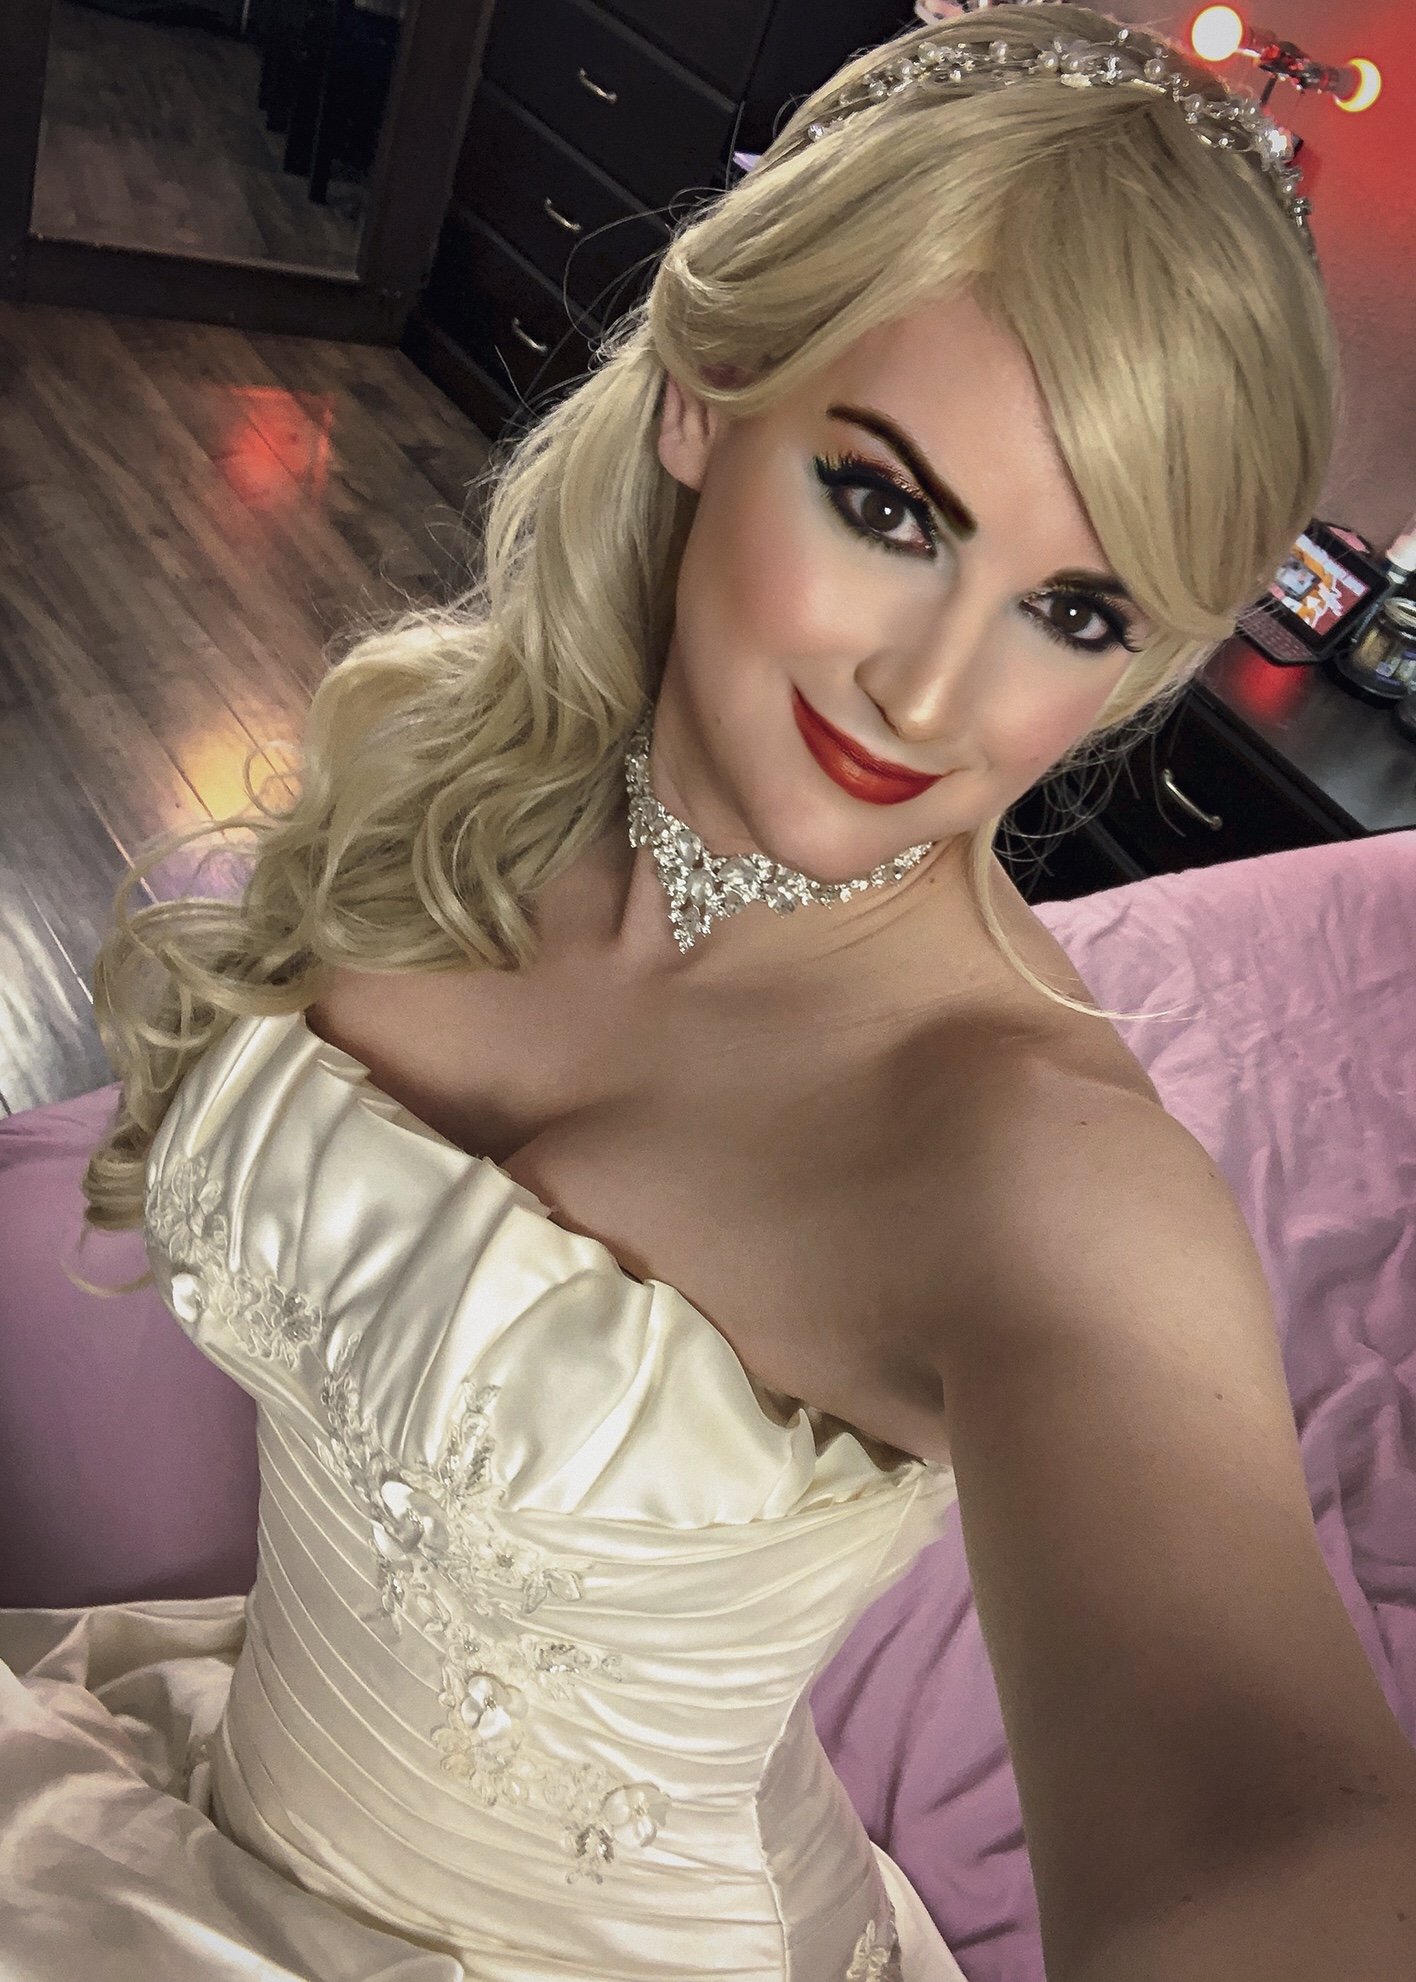 Photo by DinoSpumoni with the username @DinoSpumoni,  March 2, 2020 at 10:52 PM. The post is about the topic Sissy and the text says 'Here cums the bride #sissy'